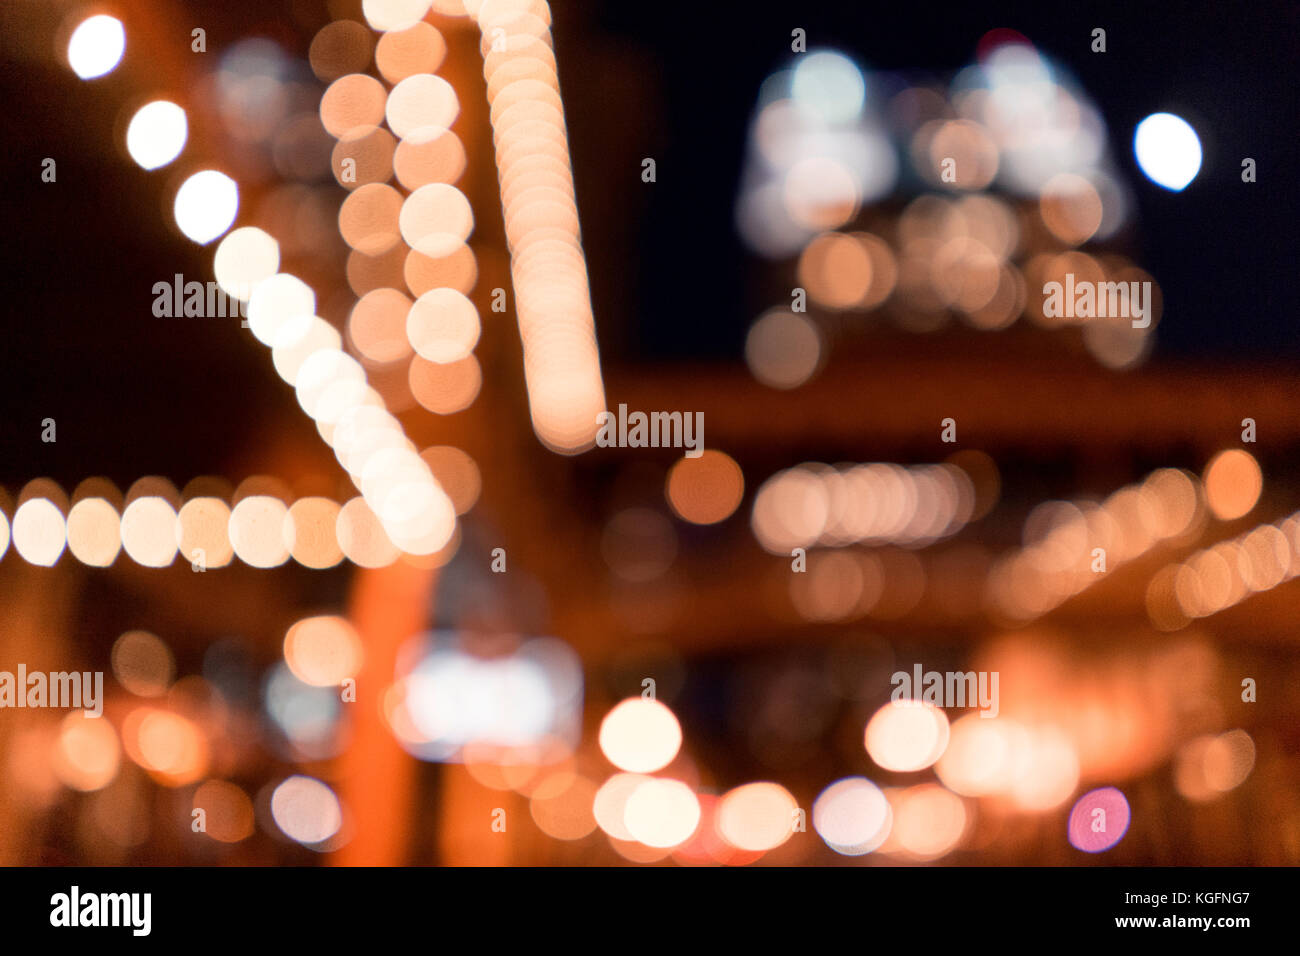 Downtown Abstract Bokeh Photography Stock Photo